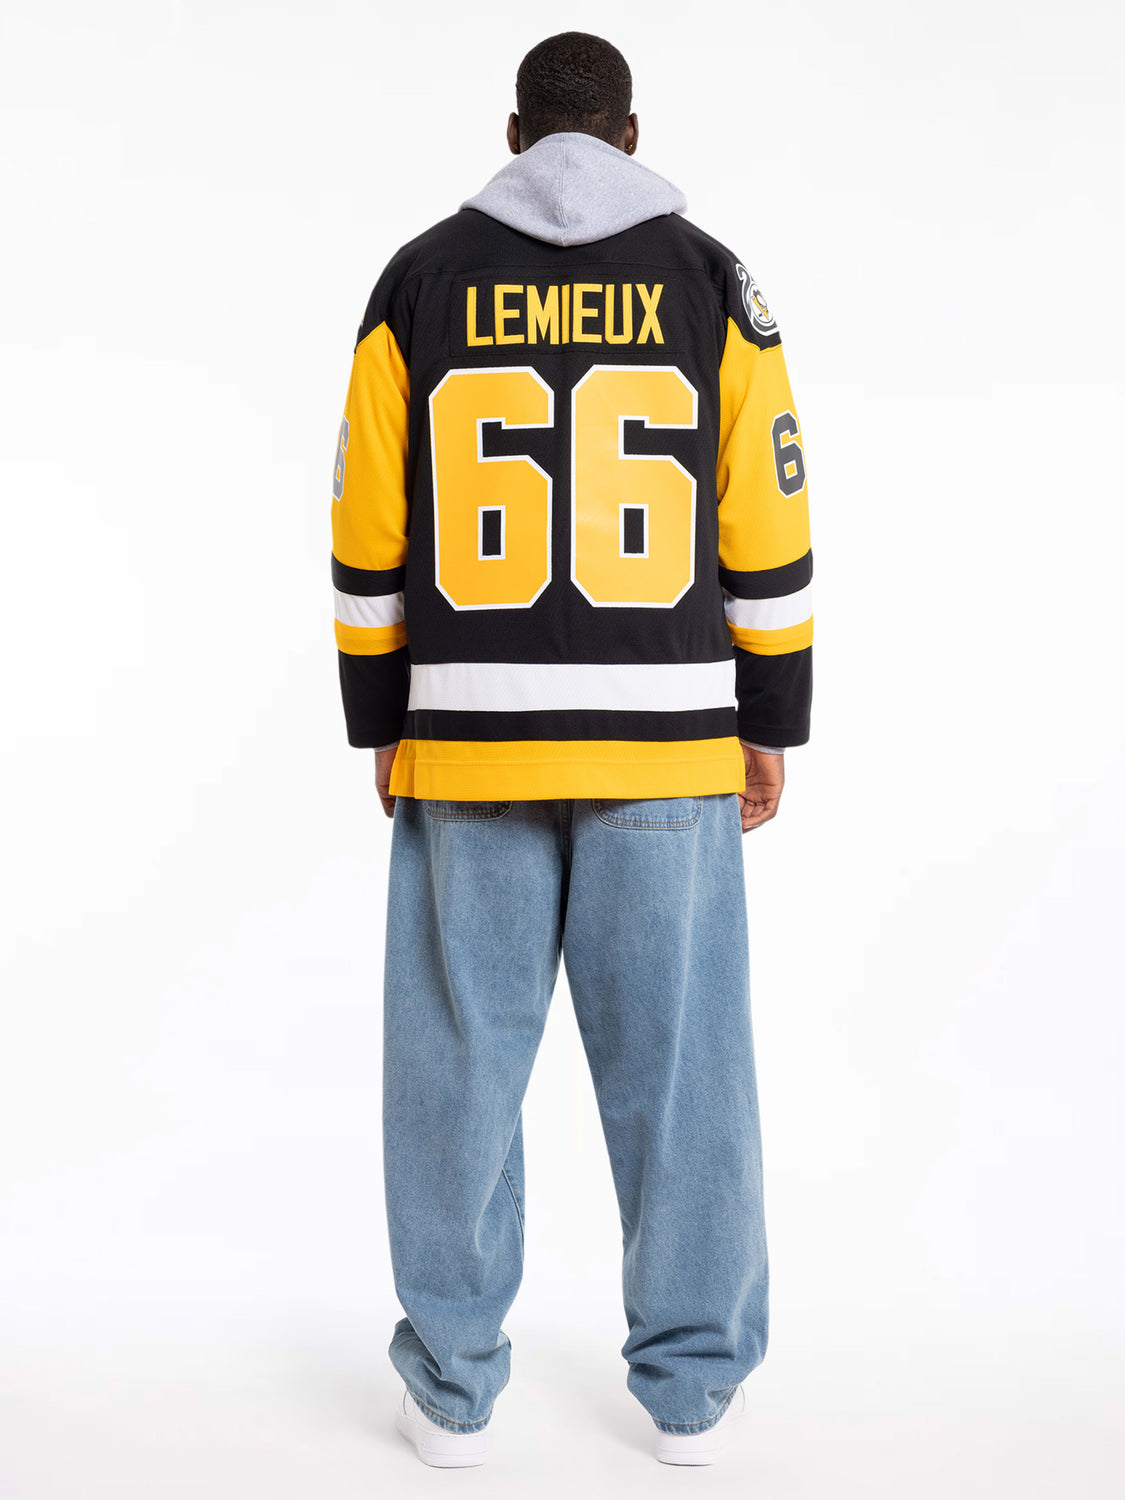 Blue Line Mario Lemieux Pittsburgh Penguins 1991 Jersey - Shop Mitchell &  Ness Authentic Jerseys and Replicas Mitchell & Ness Nostalgia Co.